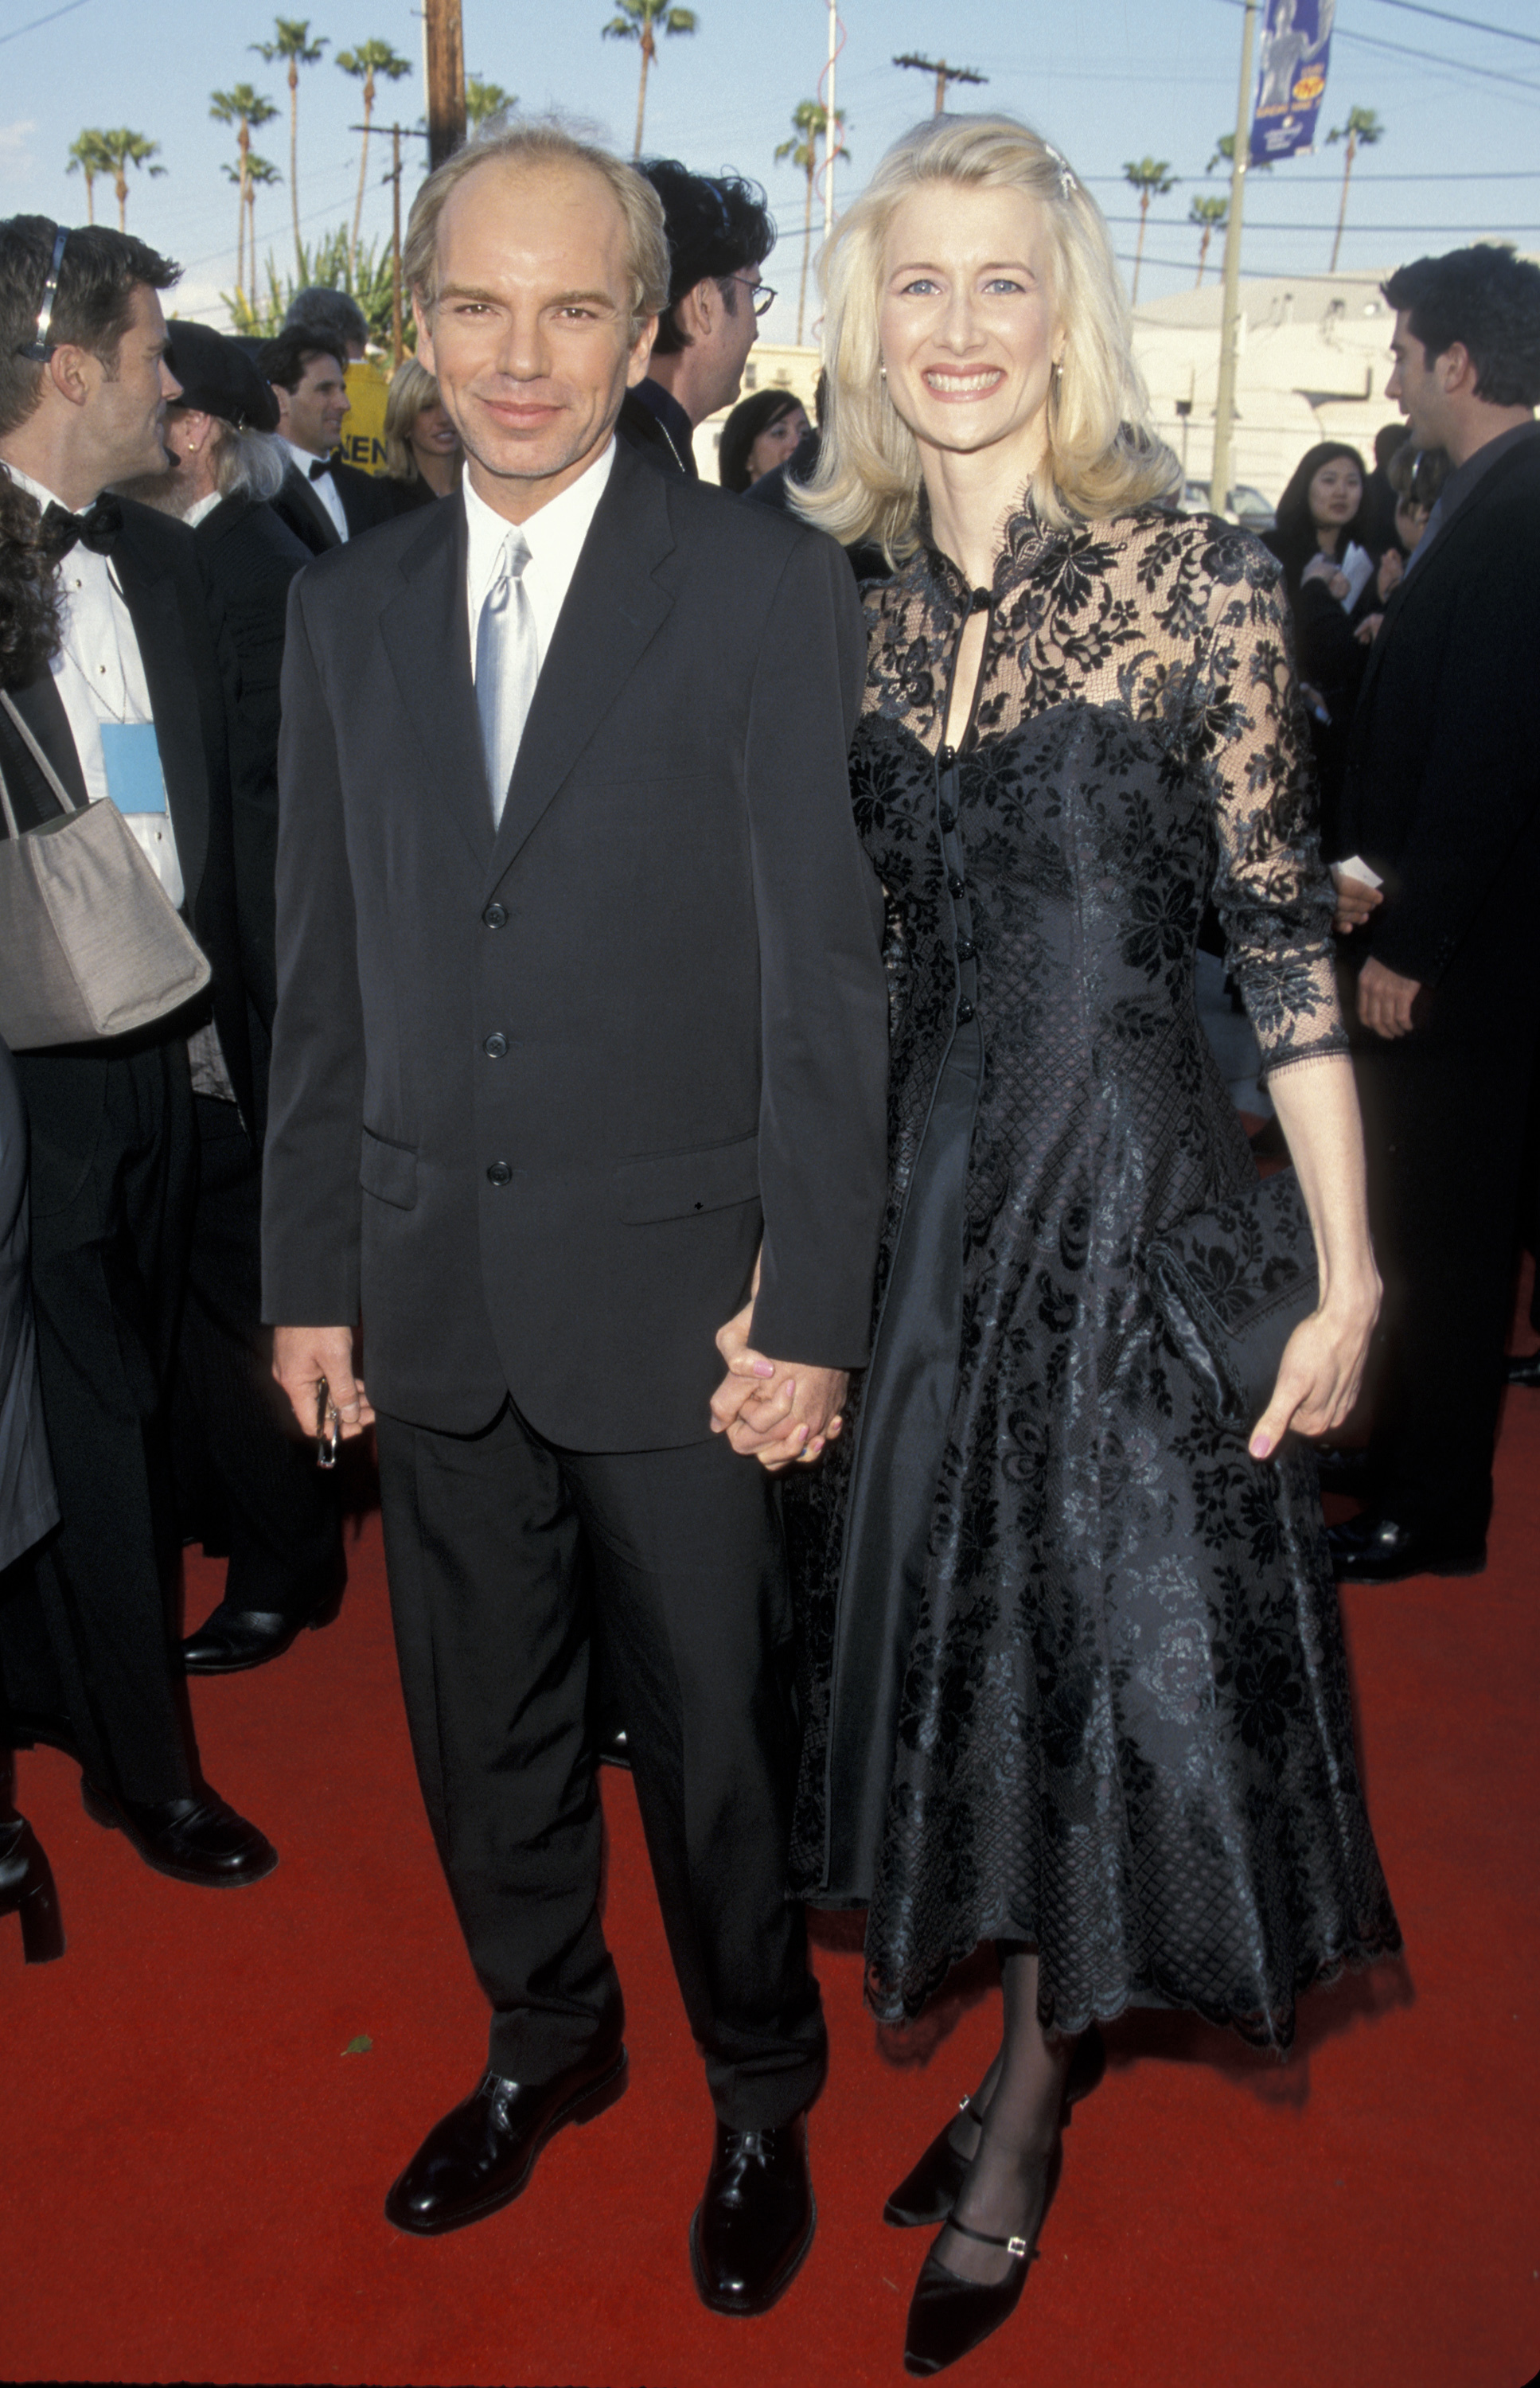 <p>Laura Dern and Billy Bob Thornton were still engaged in 1999 when he suddenly married Angelina Jolie without first telling his then-fiancée that he'd fallen for someone else. The "Marriage Story" actress discussed the brutal situation with Talk magazine in 2000. "I left our home to work on a movie, and while I was away, my boyfriend got married, and I've never heard from him again," she recalled. "It's like a sudden death. For no one has there been any closure or clarity."</p>